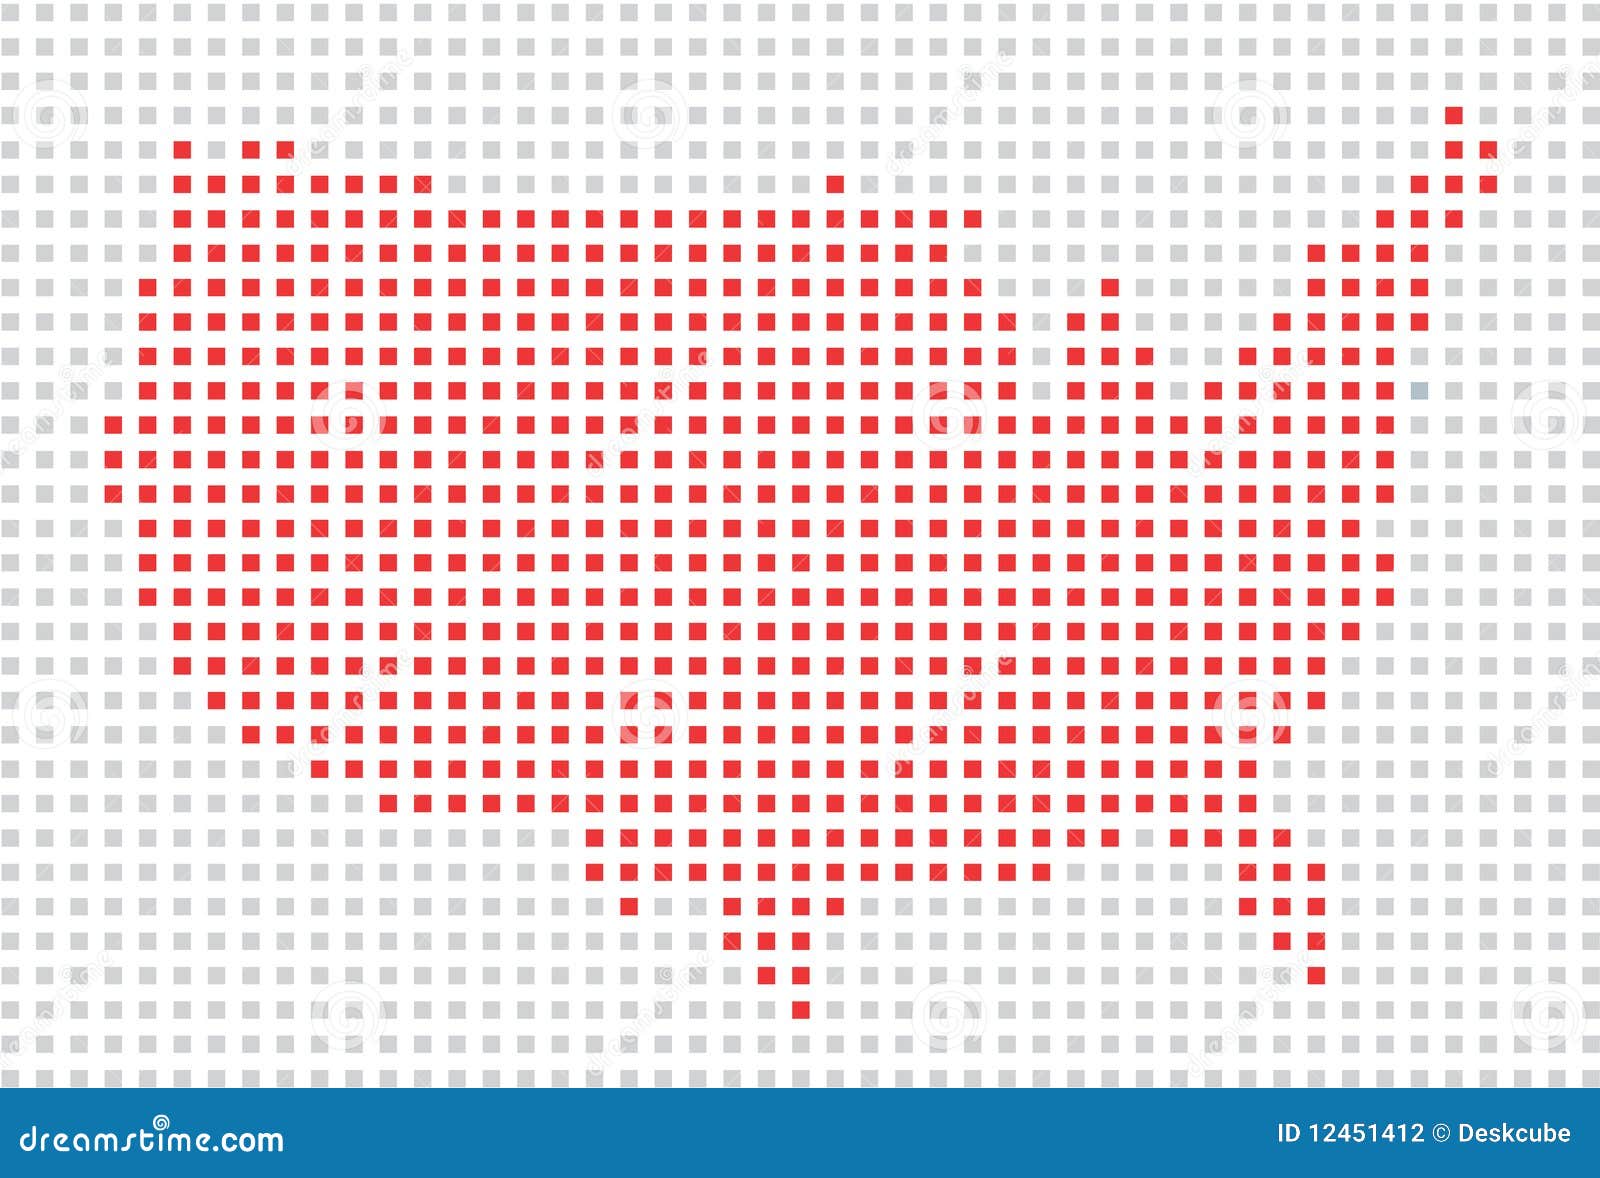 united states map in dots